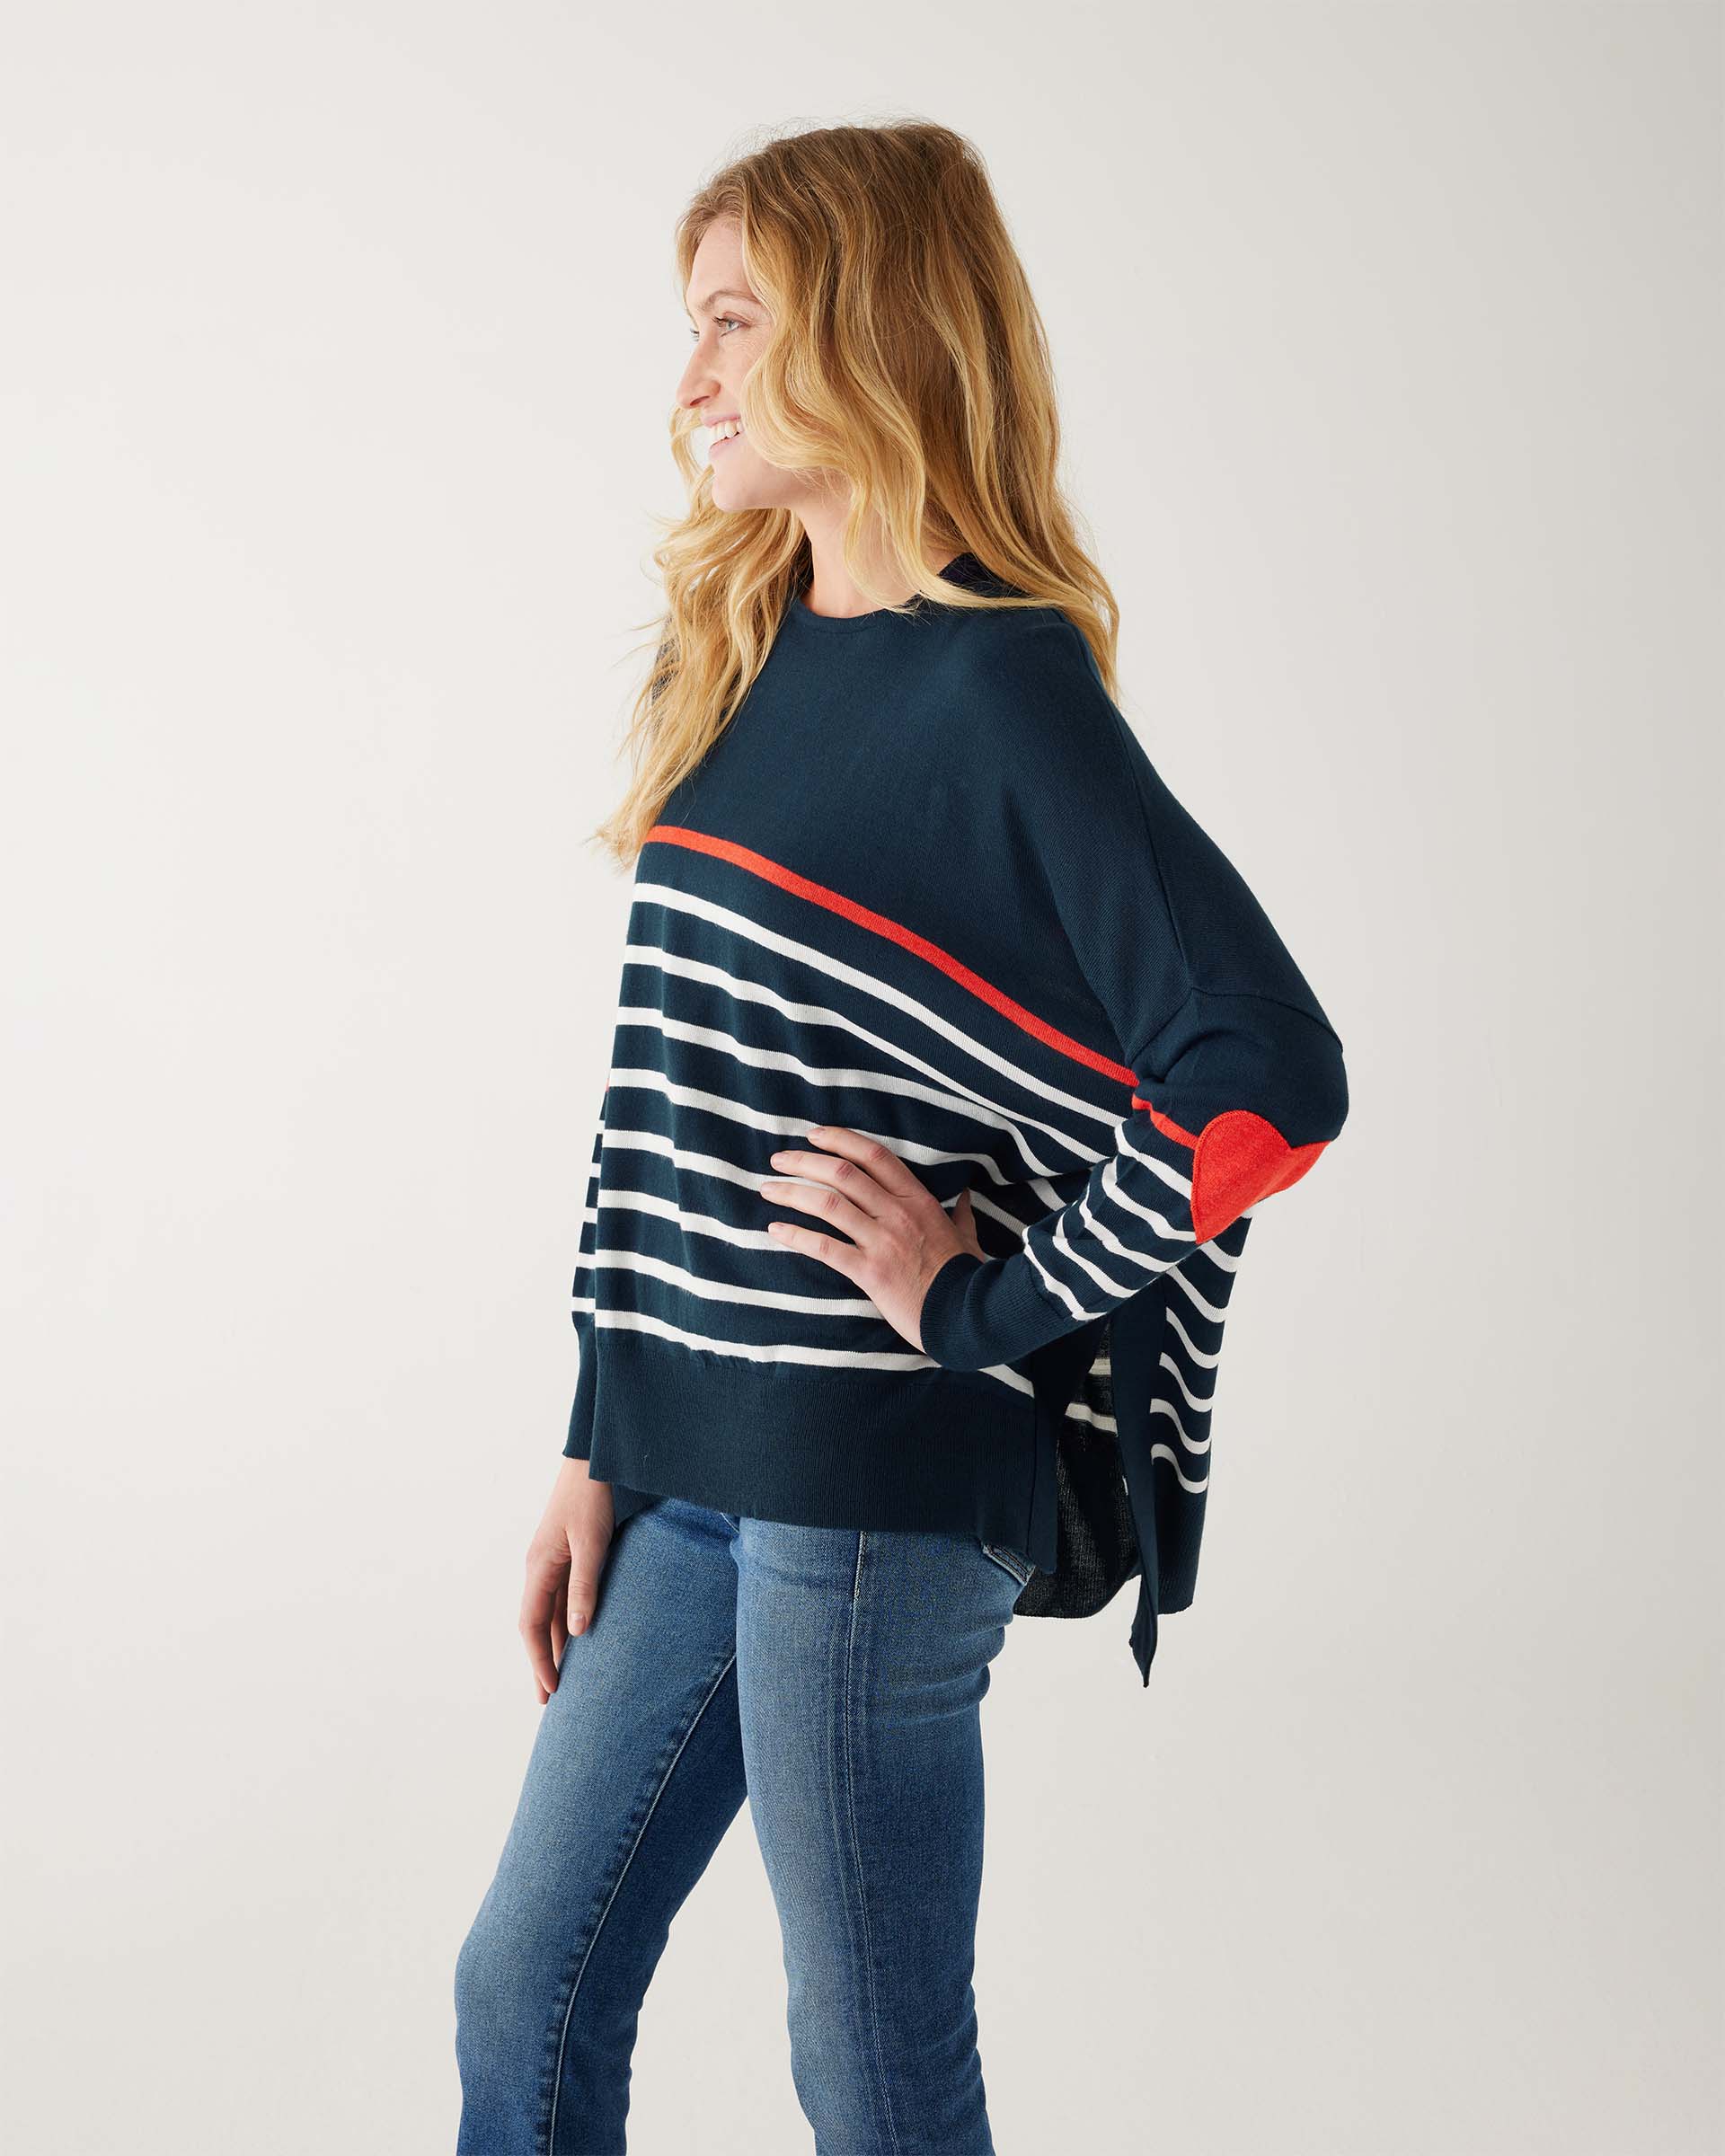 female wearing navy sweater with white stripes & red heart elbow patch sideways on white background